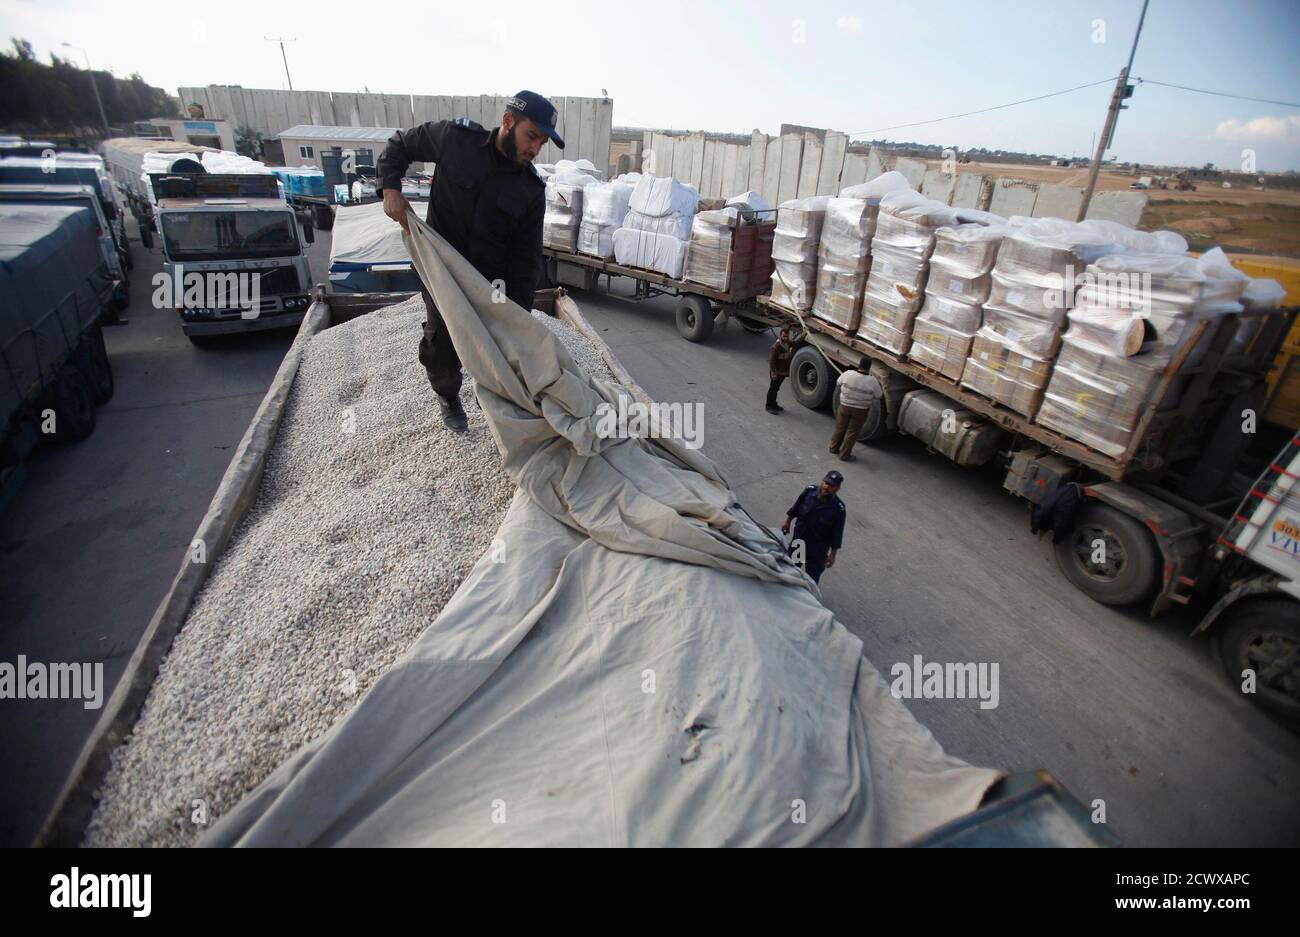 A member of Hamas security forces checks a truck loaded with gravel at the Kerem Shalom crossing between Israel and the southern Gaza Strip December 30, 2012. Israel eased its blockade of Gaza on Sunday, allowing a shipment of gravel for private construction into the Palestinian territory for the first time since Hamas seized control in 2007.   REUTERS/Ibraheem Abu Mustafa (GAZA - Tags: POLITICS) Stock Photo